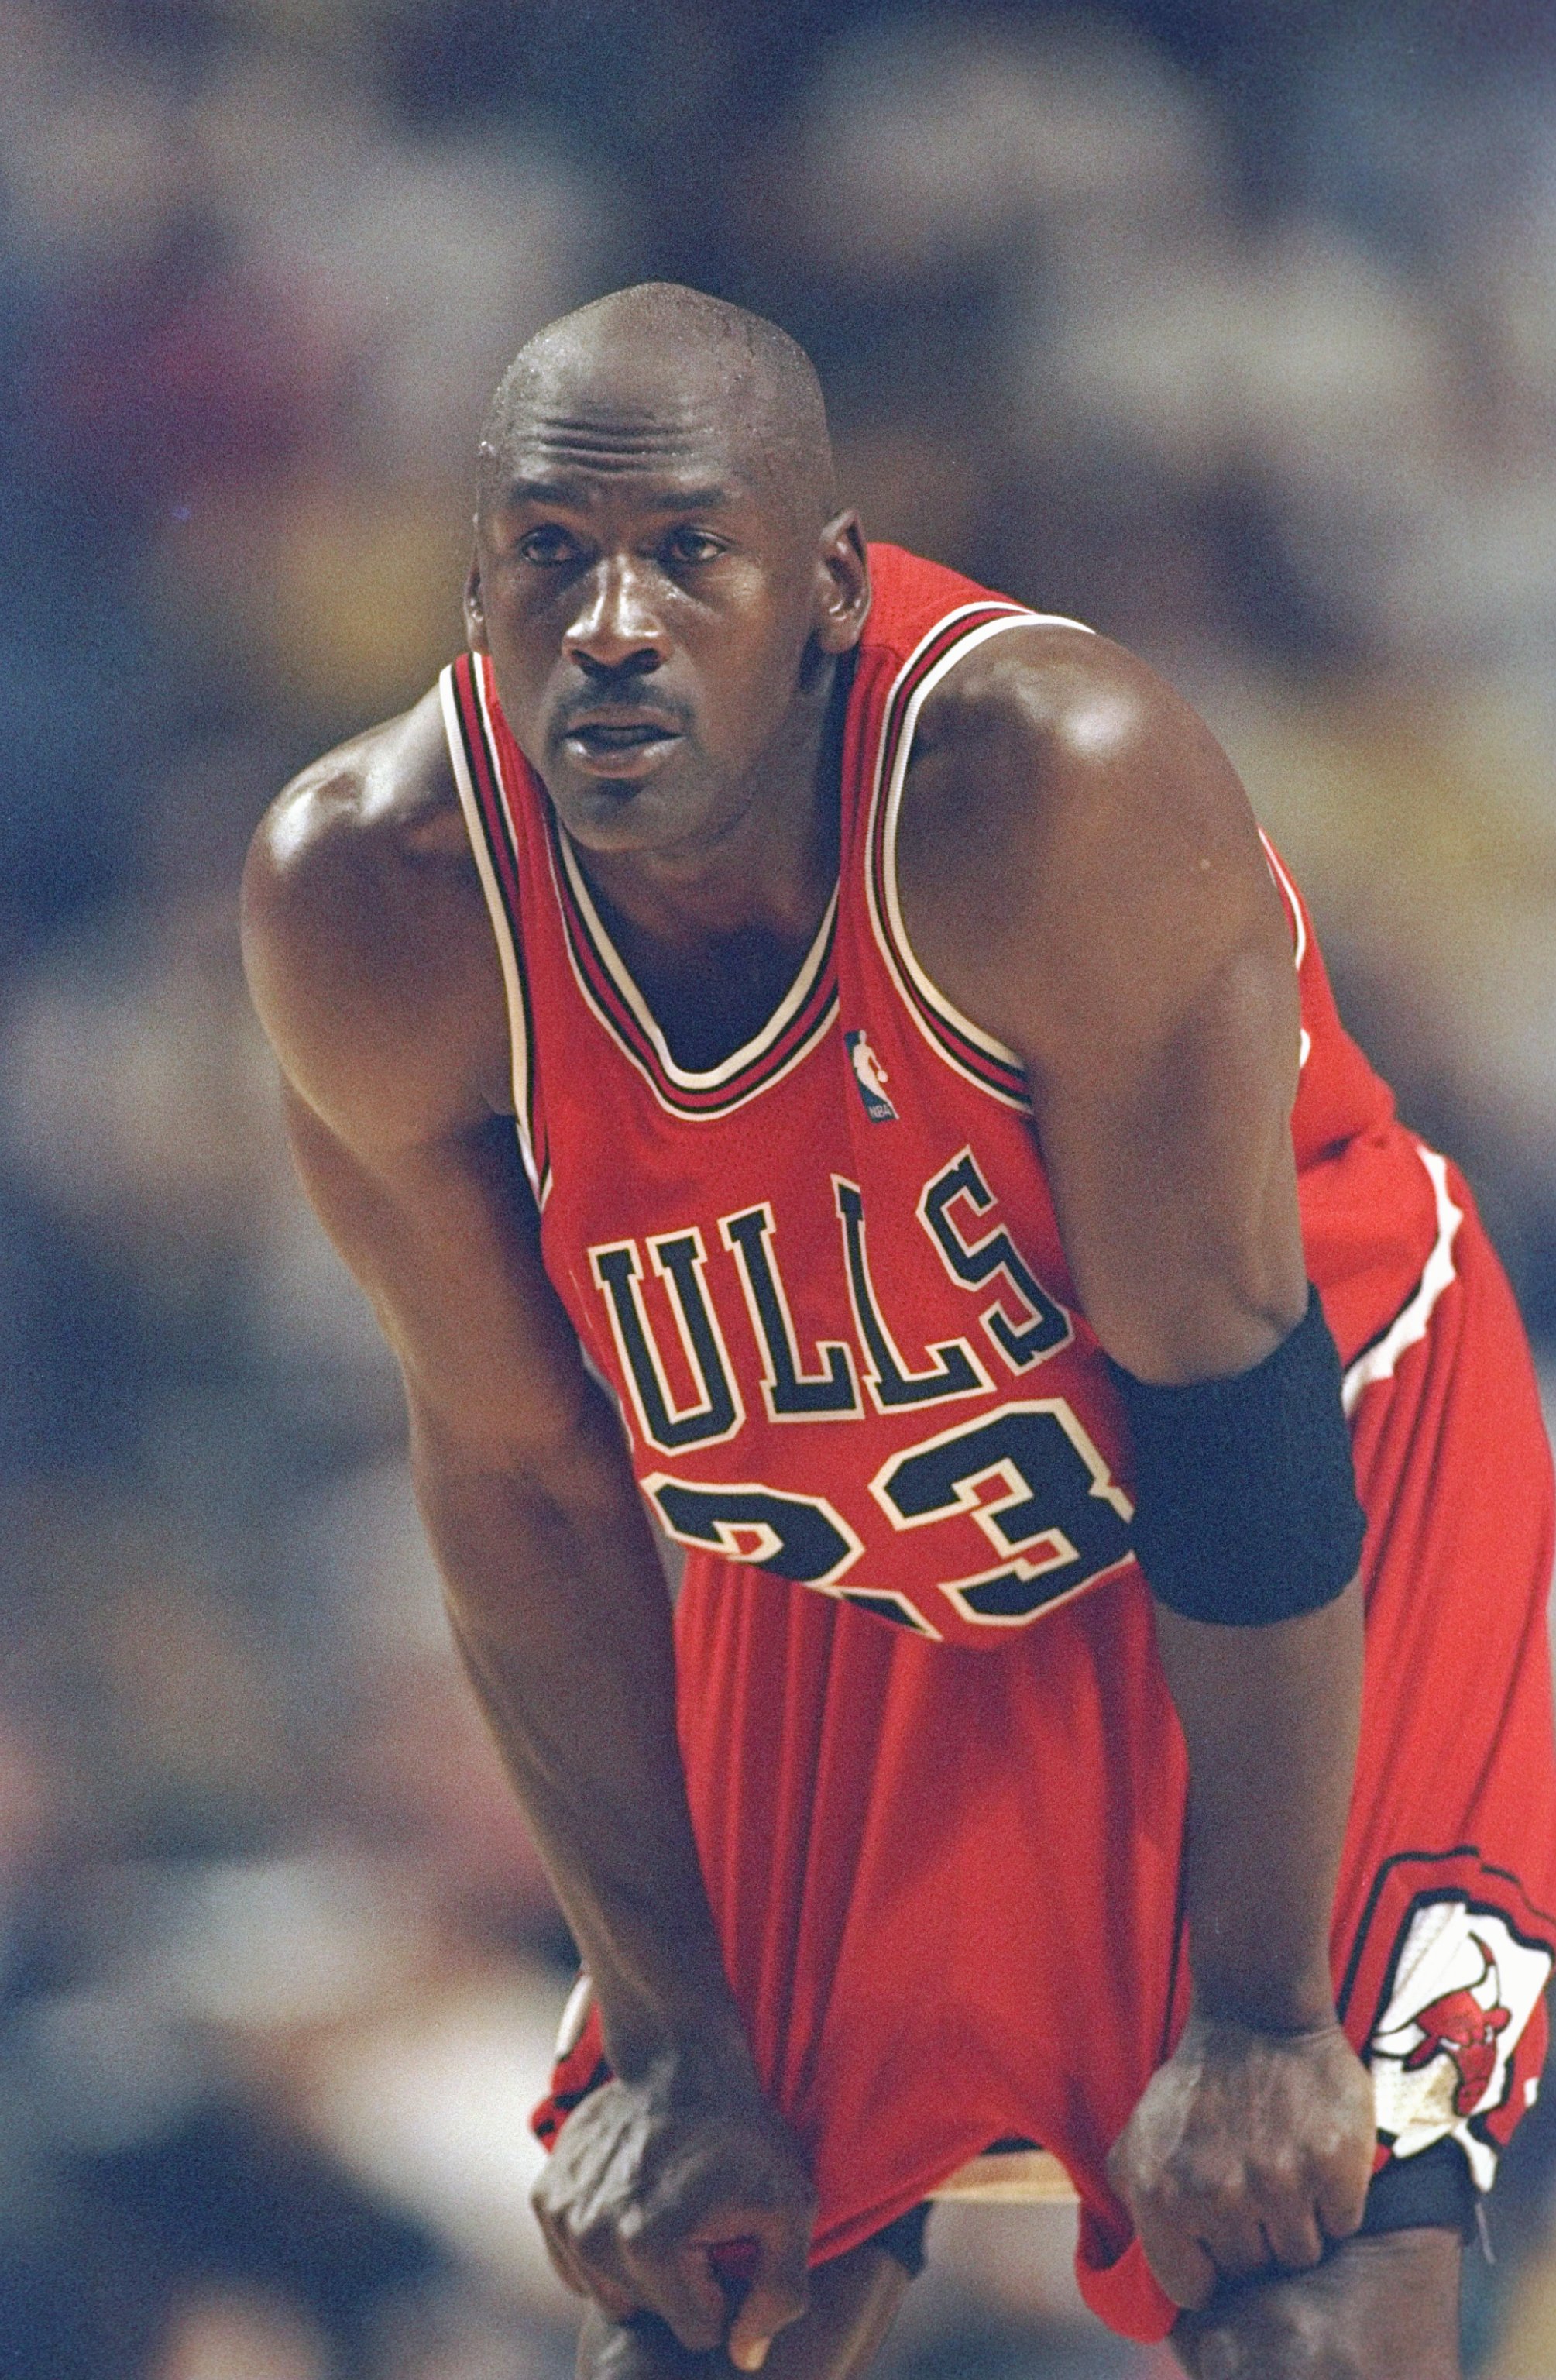 Michael Jordan of the Chicago Bulls shoots against the Los Angeles